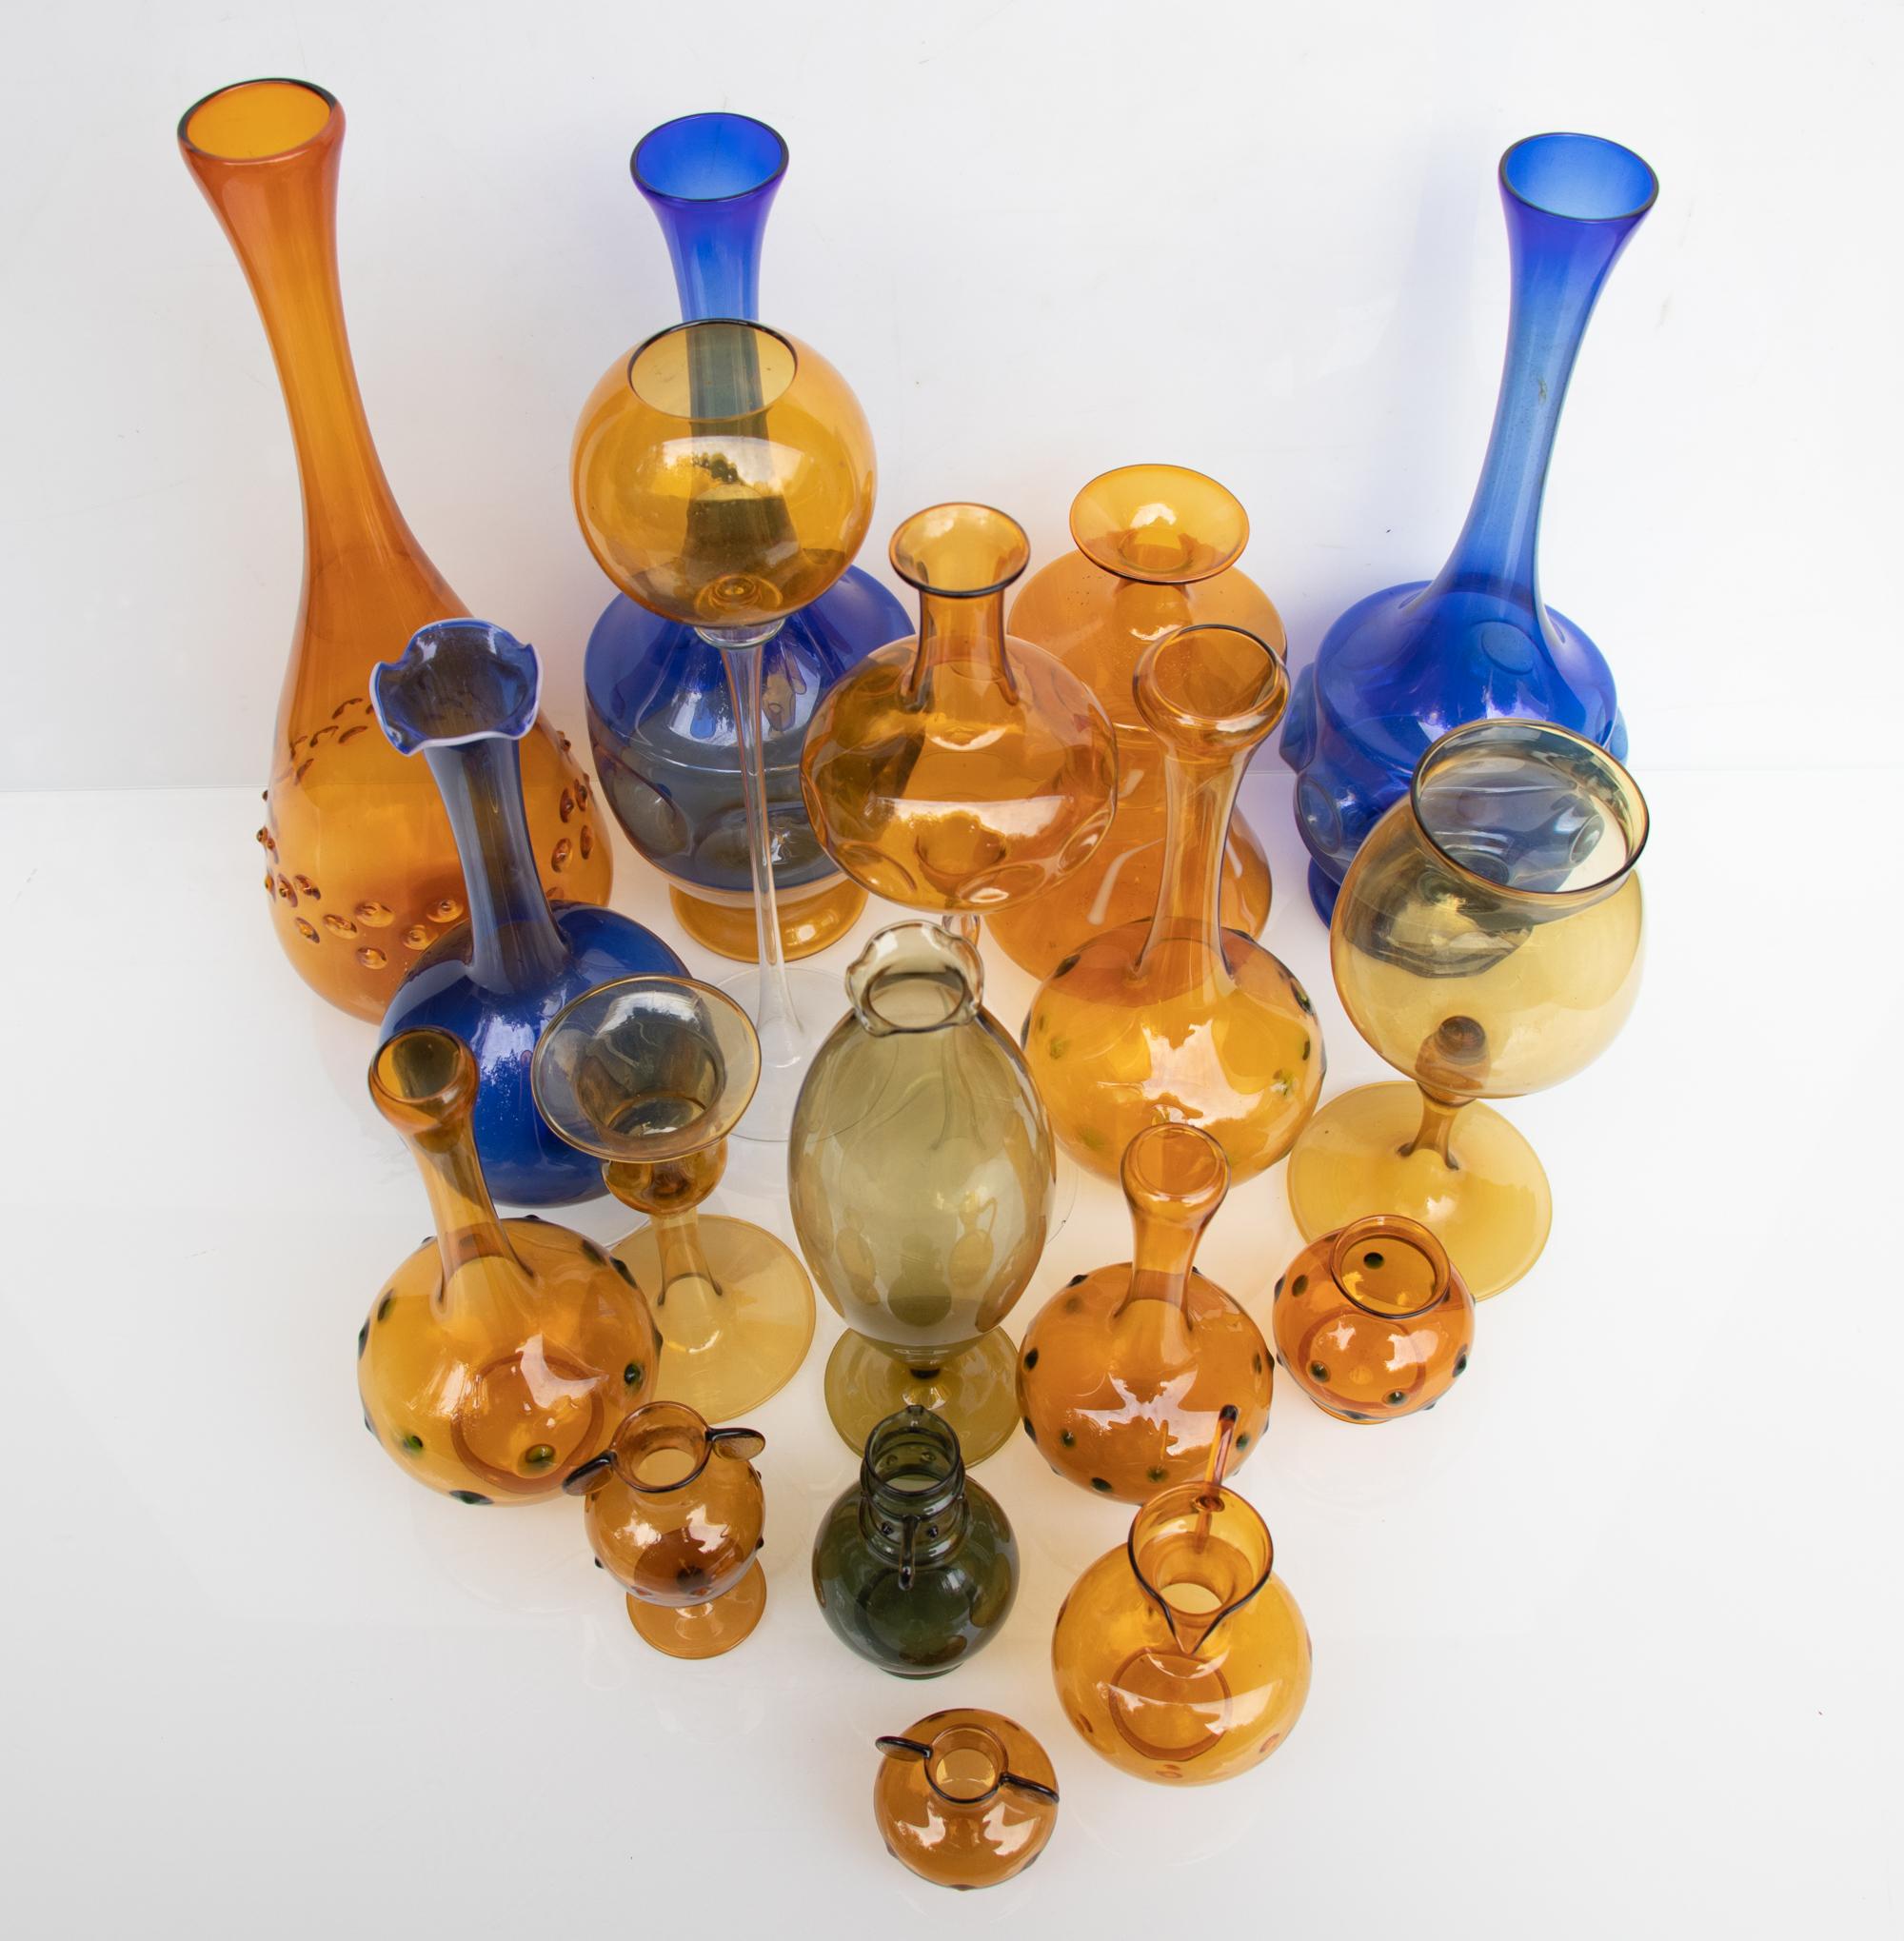 Collection of 18 Decorative Glass Vases by Bimini / Lauscha In Good Condition For Sale In Niederdorfelden, Hessen